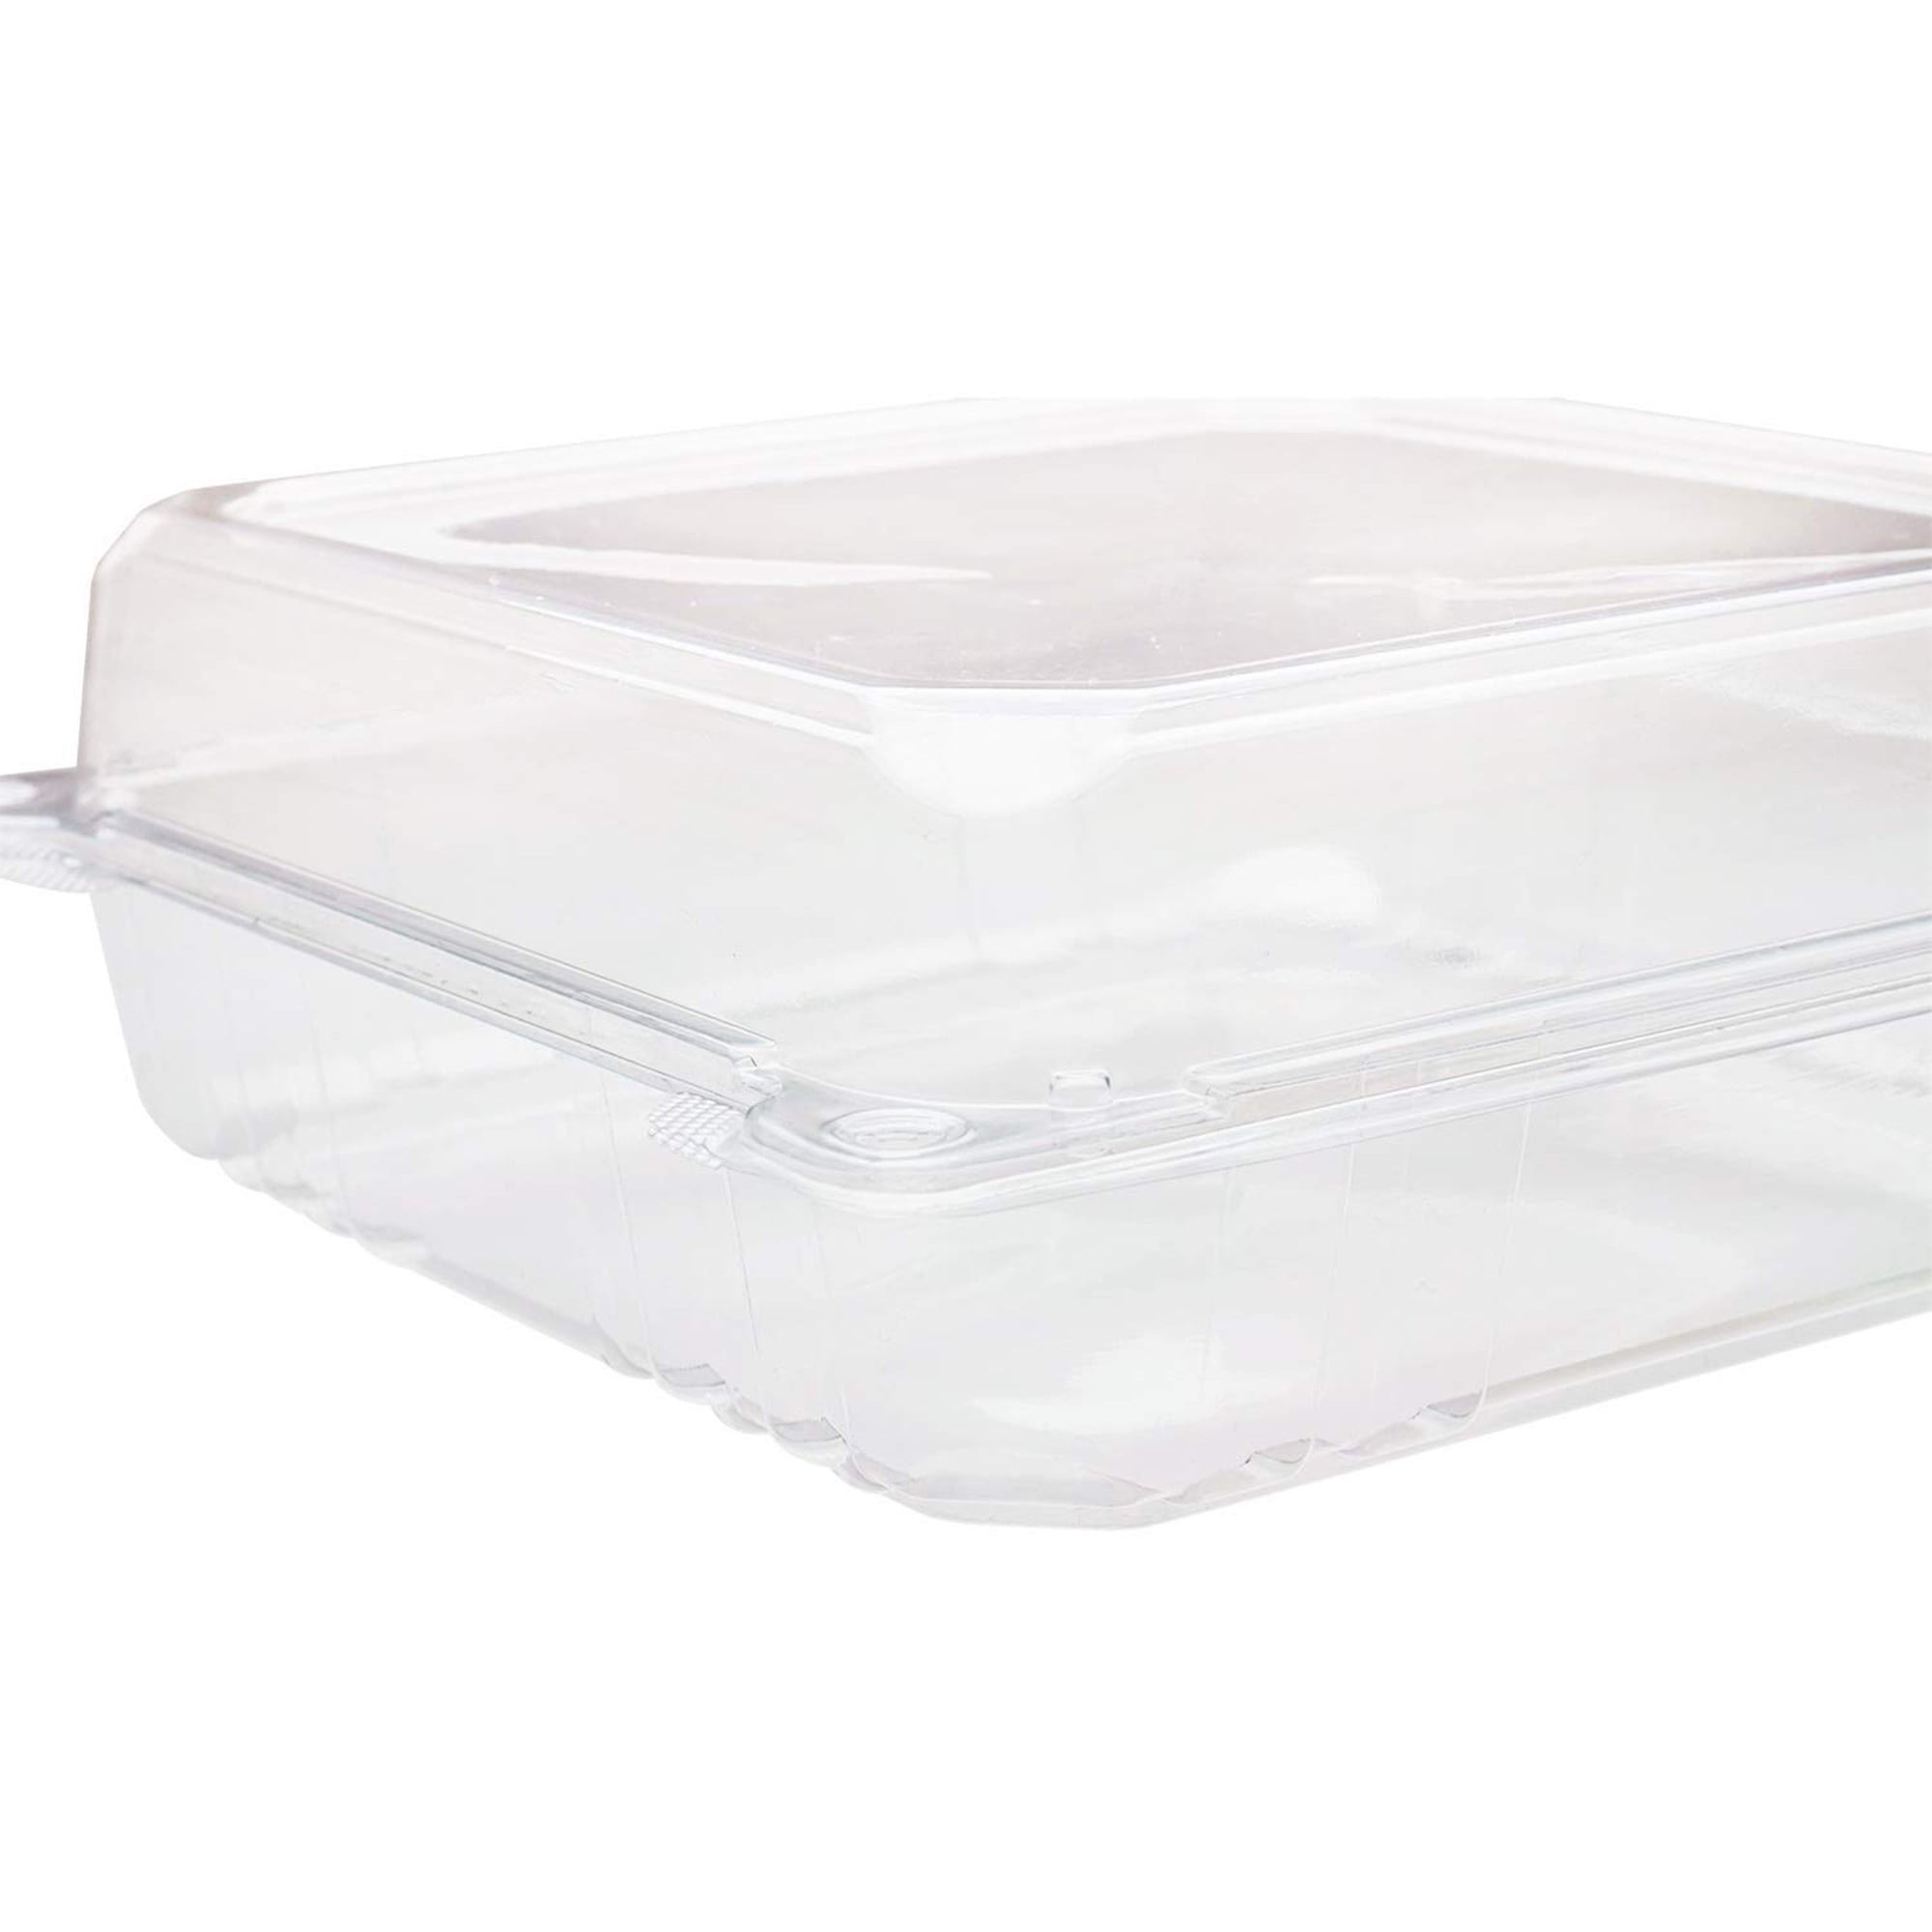 Basicwise QI004138L.2 14.75 x 8.75 x 13 in. Plastic Storage Food Holder  Containers with a Mea, 1 - Kroger